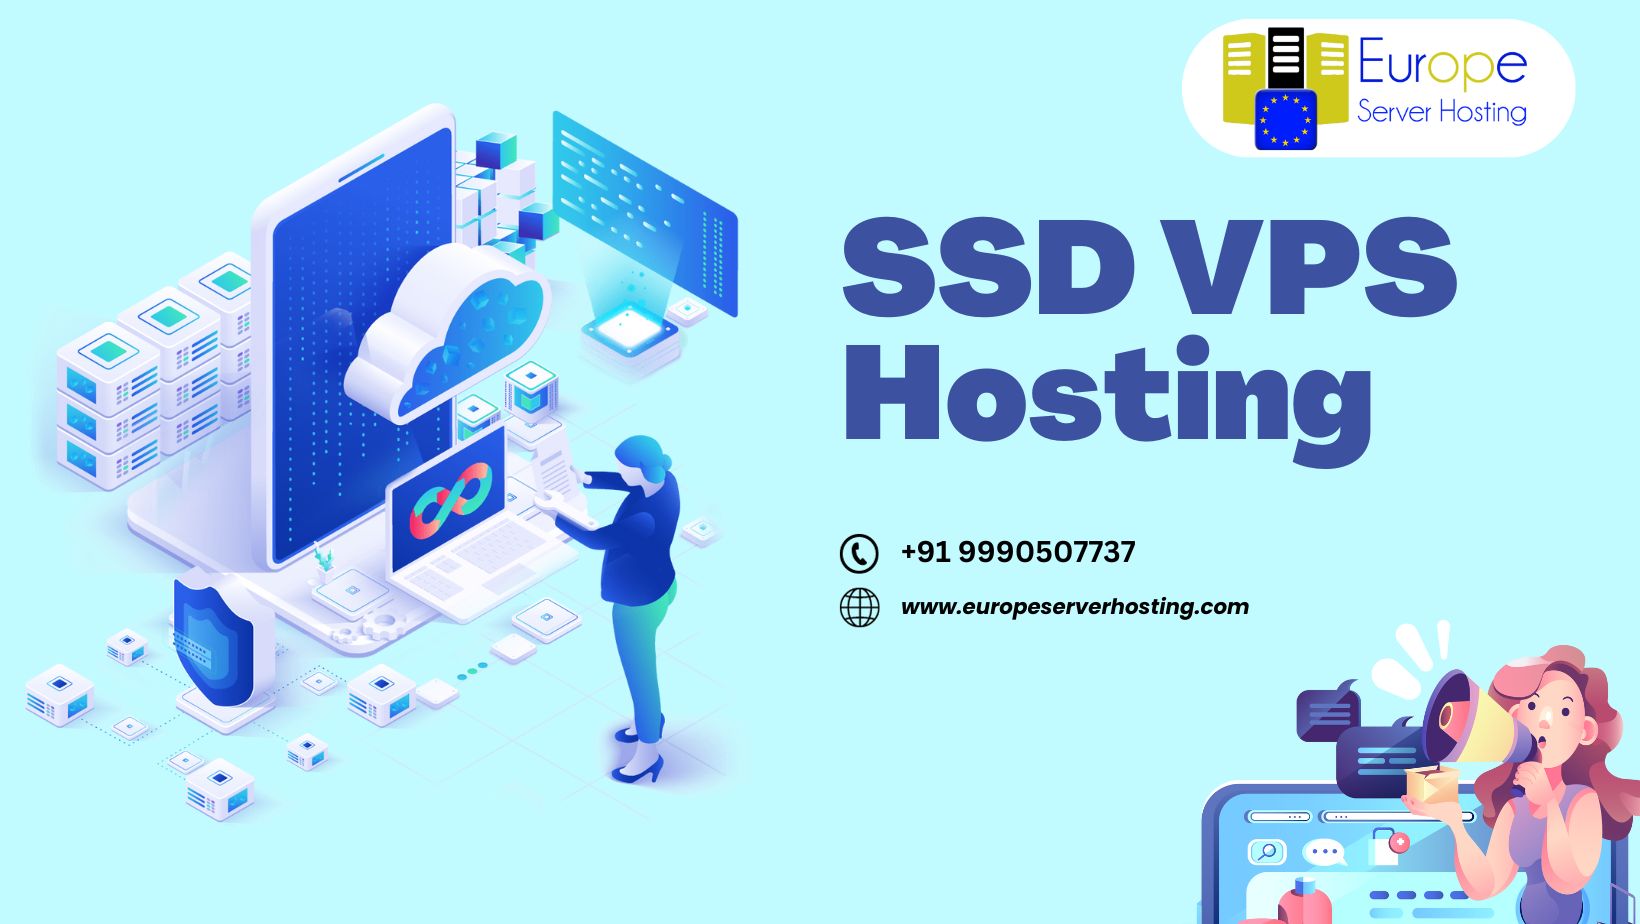 SSD VPS hosting is a game-changer. Its combination of SSD storage and virtual private servers offers superior speed, reliability, scalability, and security for your website. If you're serious about your online presence and want to provide the best user experience to your visitors, consider making the switch to SSD VPS hosting. It's an investment that pays off in the form of faster load times, better SEO rankings, and increased customer satisfaction.